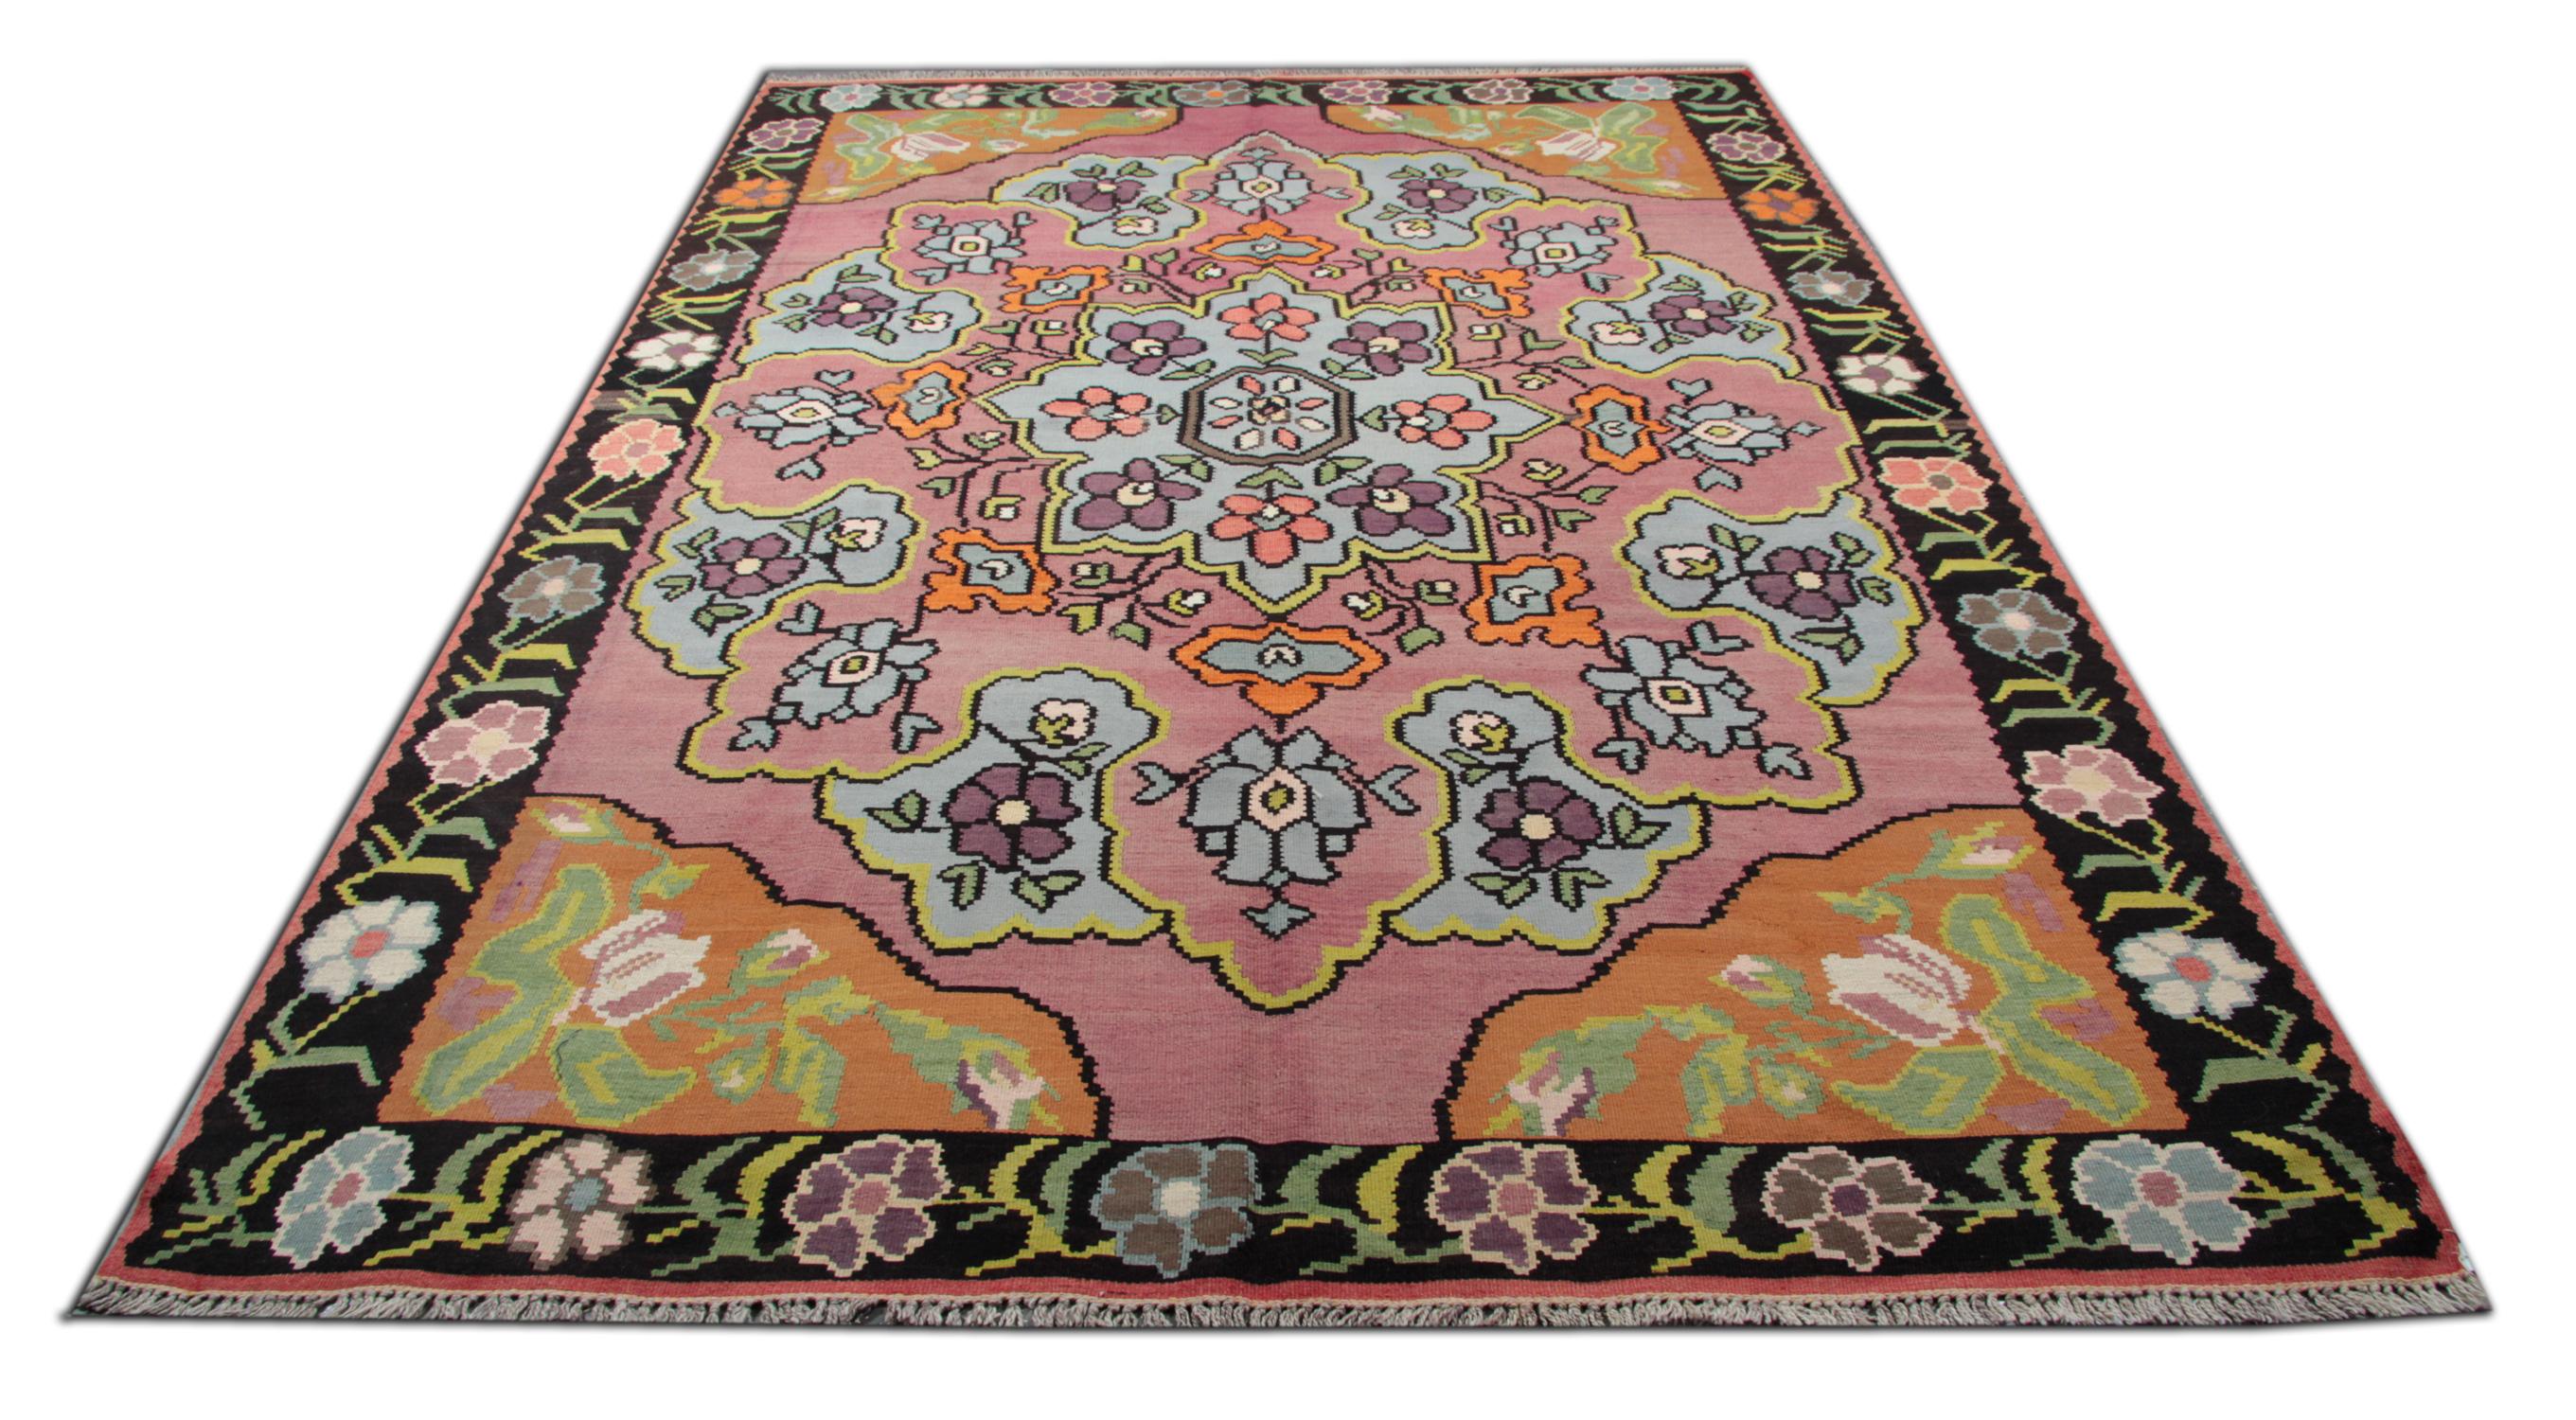 This handmade carpet colourful Turkish rug is woven by very skilled weavers in Turkey, who used the highest quality wool and cotton. The flat-weave rug has light blue, orange, green, white, pink and brown colours. The pink background of this floral